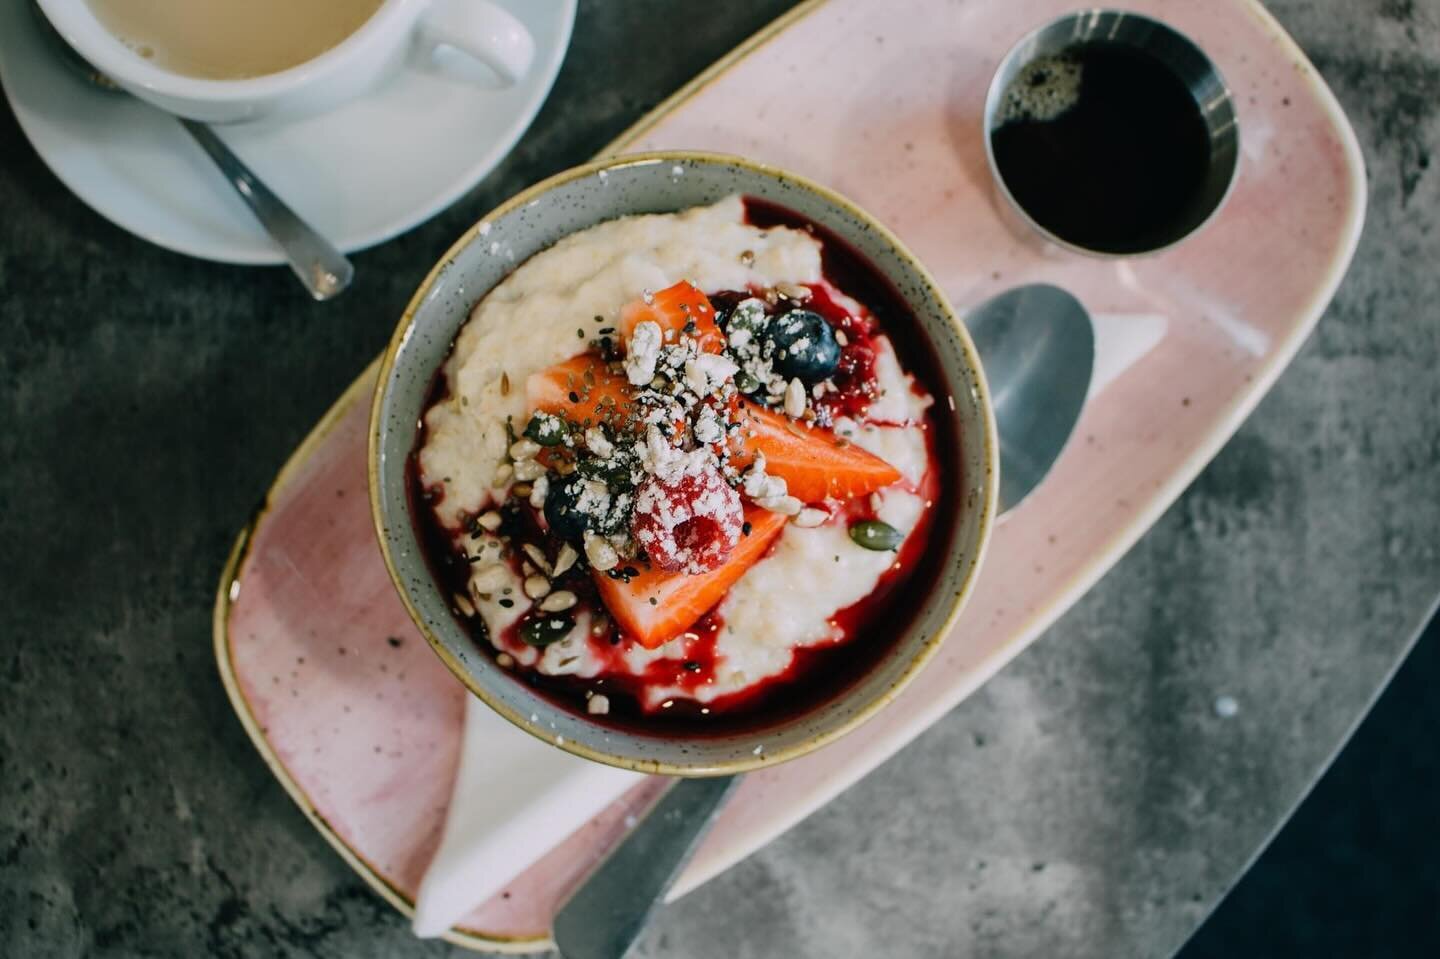 ❄️ Warm up this morning with some of our delicious porridge for breakfast! We&rsquo;re open today until 5 ❄️